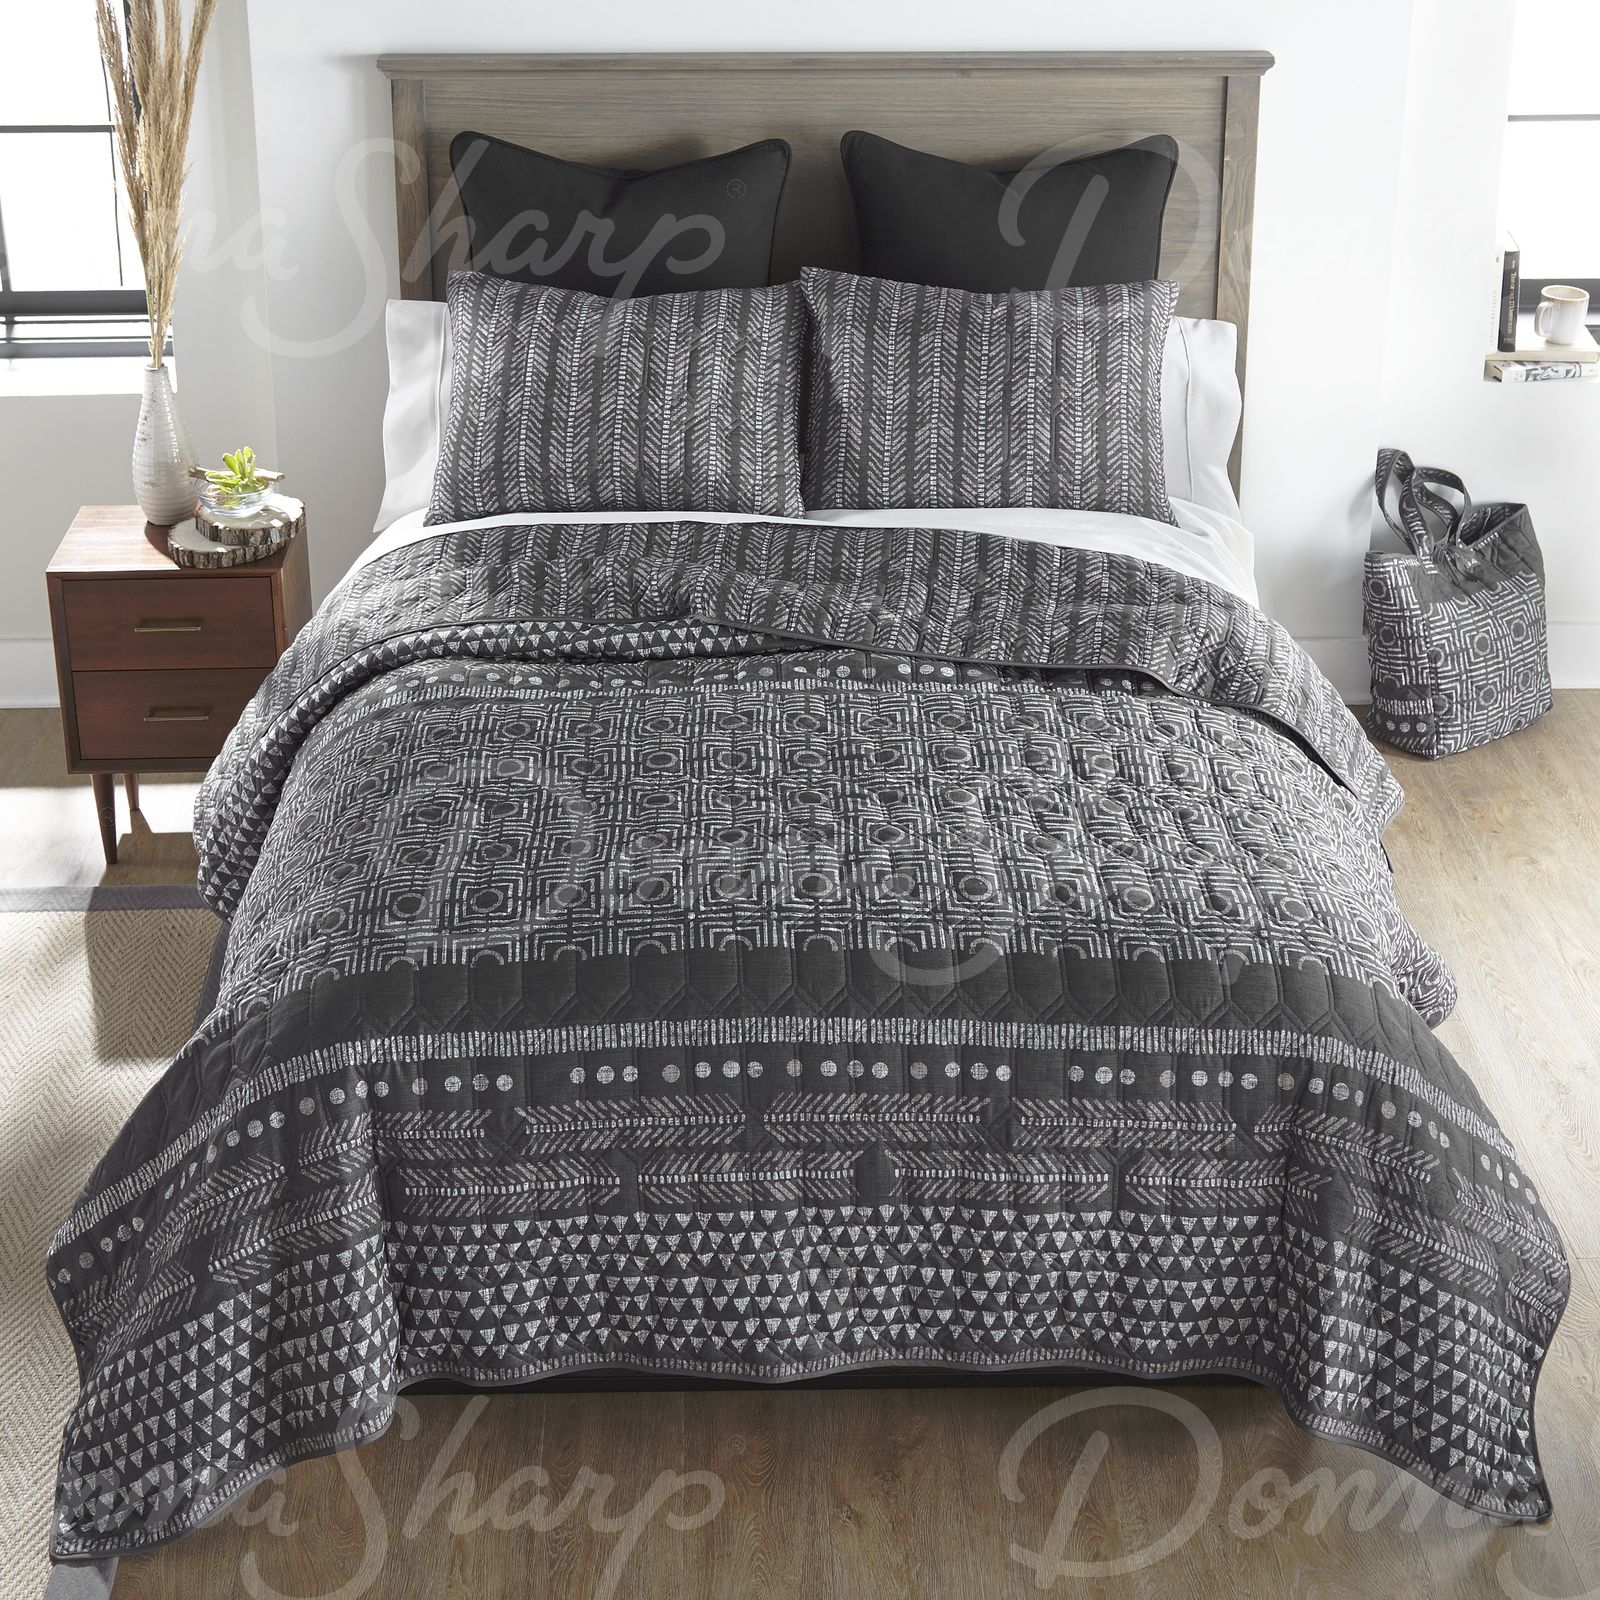 Nomad Quilted Bedding by Donna Sharp